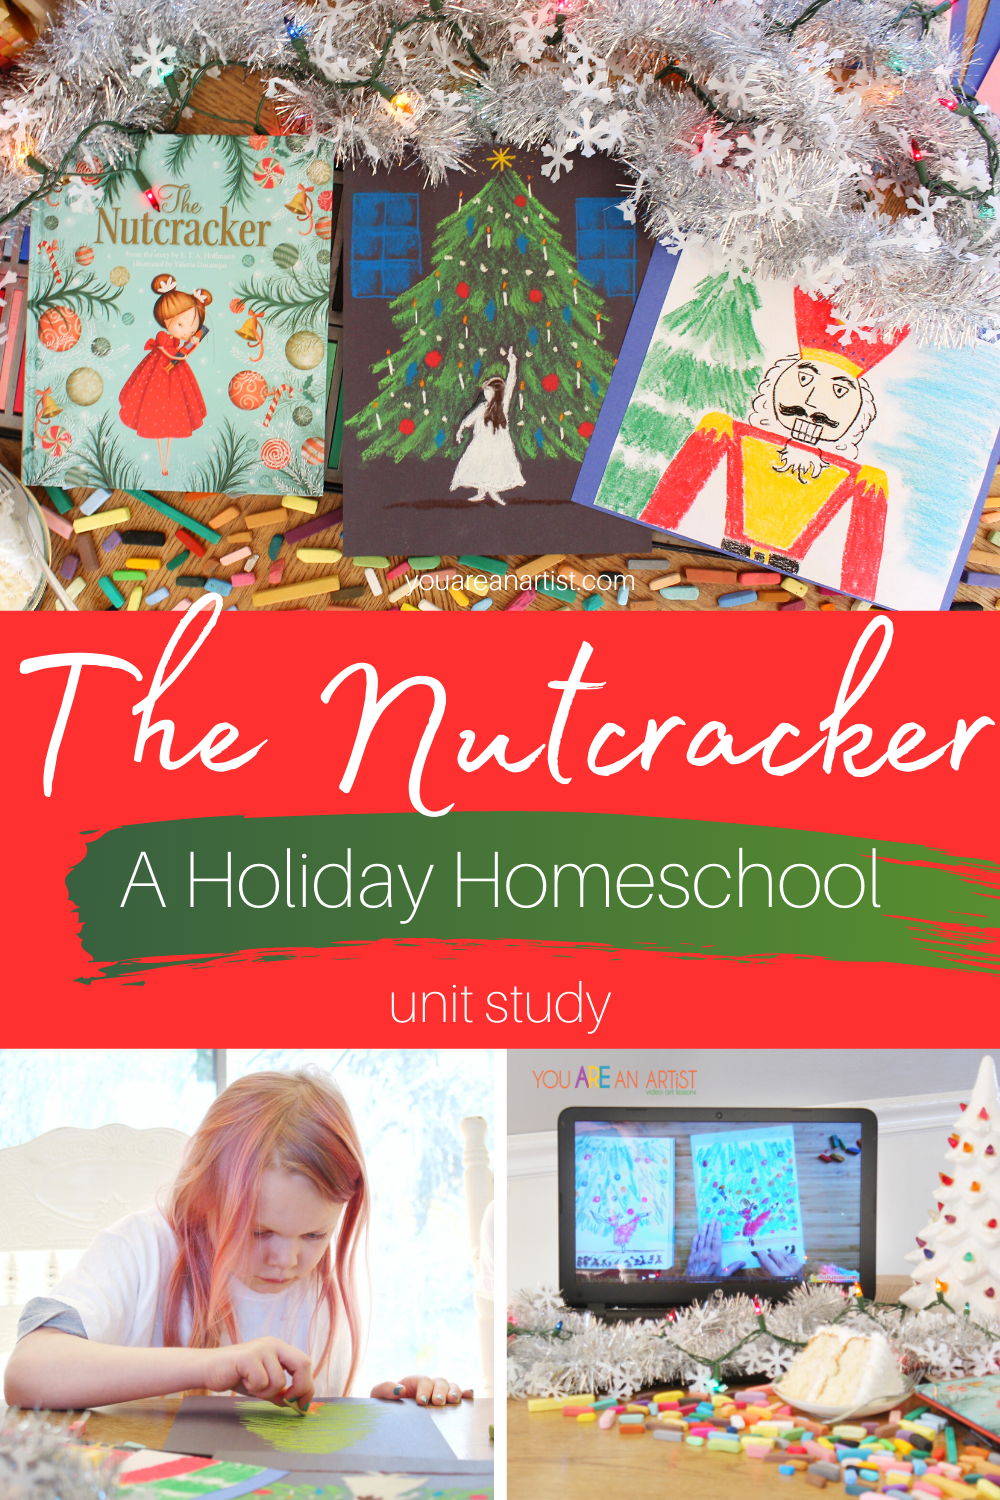 The Nutcracker: A Holiday Homeschool Unit Study - Enjoy the holiday season with The Nutcracker, chalk pastels, and SQUILT! Throw in a little hot chocolate and twinkle lights and you've got a Nutcracker chalk pastel teatime! #Nutcracker #Nutcrackerartlessons #Nutcrackerballet #Christmas #chalkpastels #Nutcrackerart #homeschoolart #Nutcrackerstudy #holidayhomeschooling